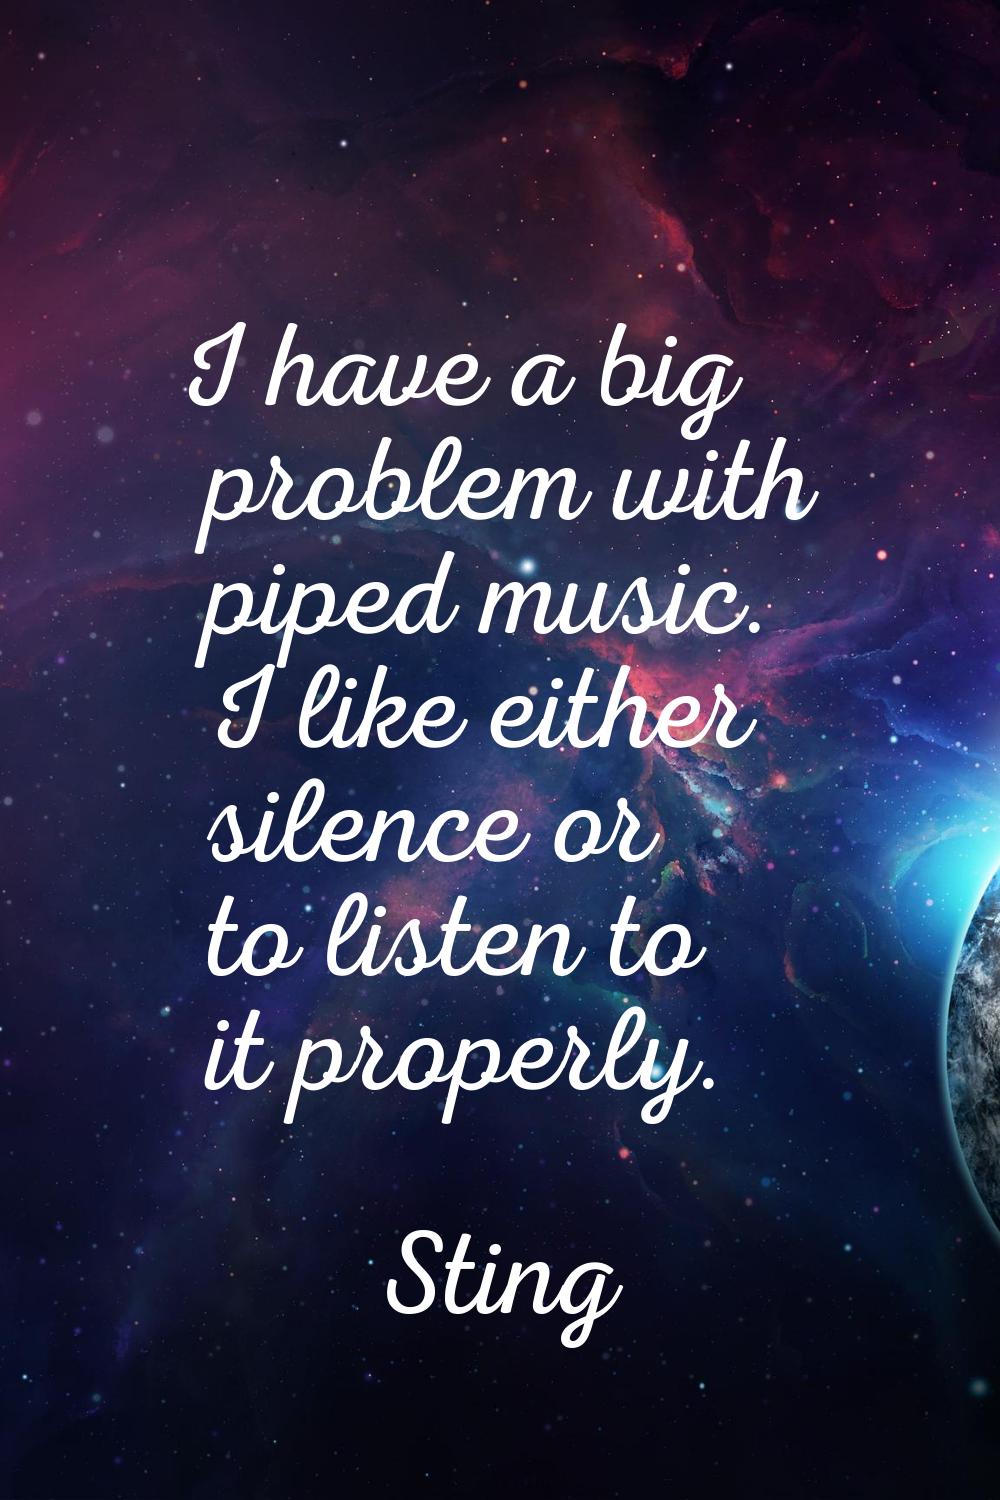 I have a big problem with piped music. I like either silence or to listen to it properly.